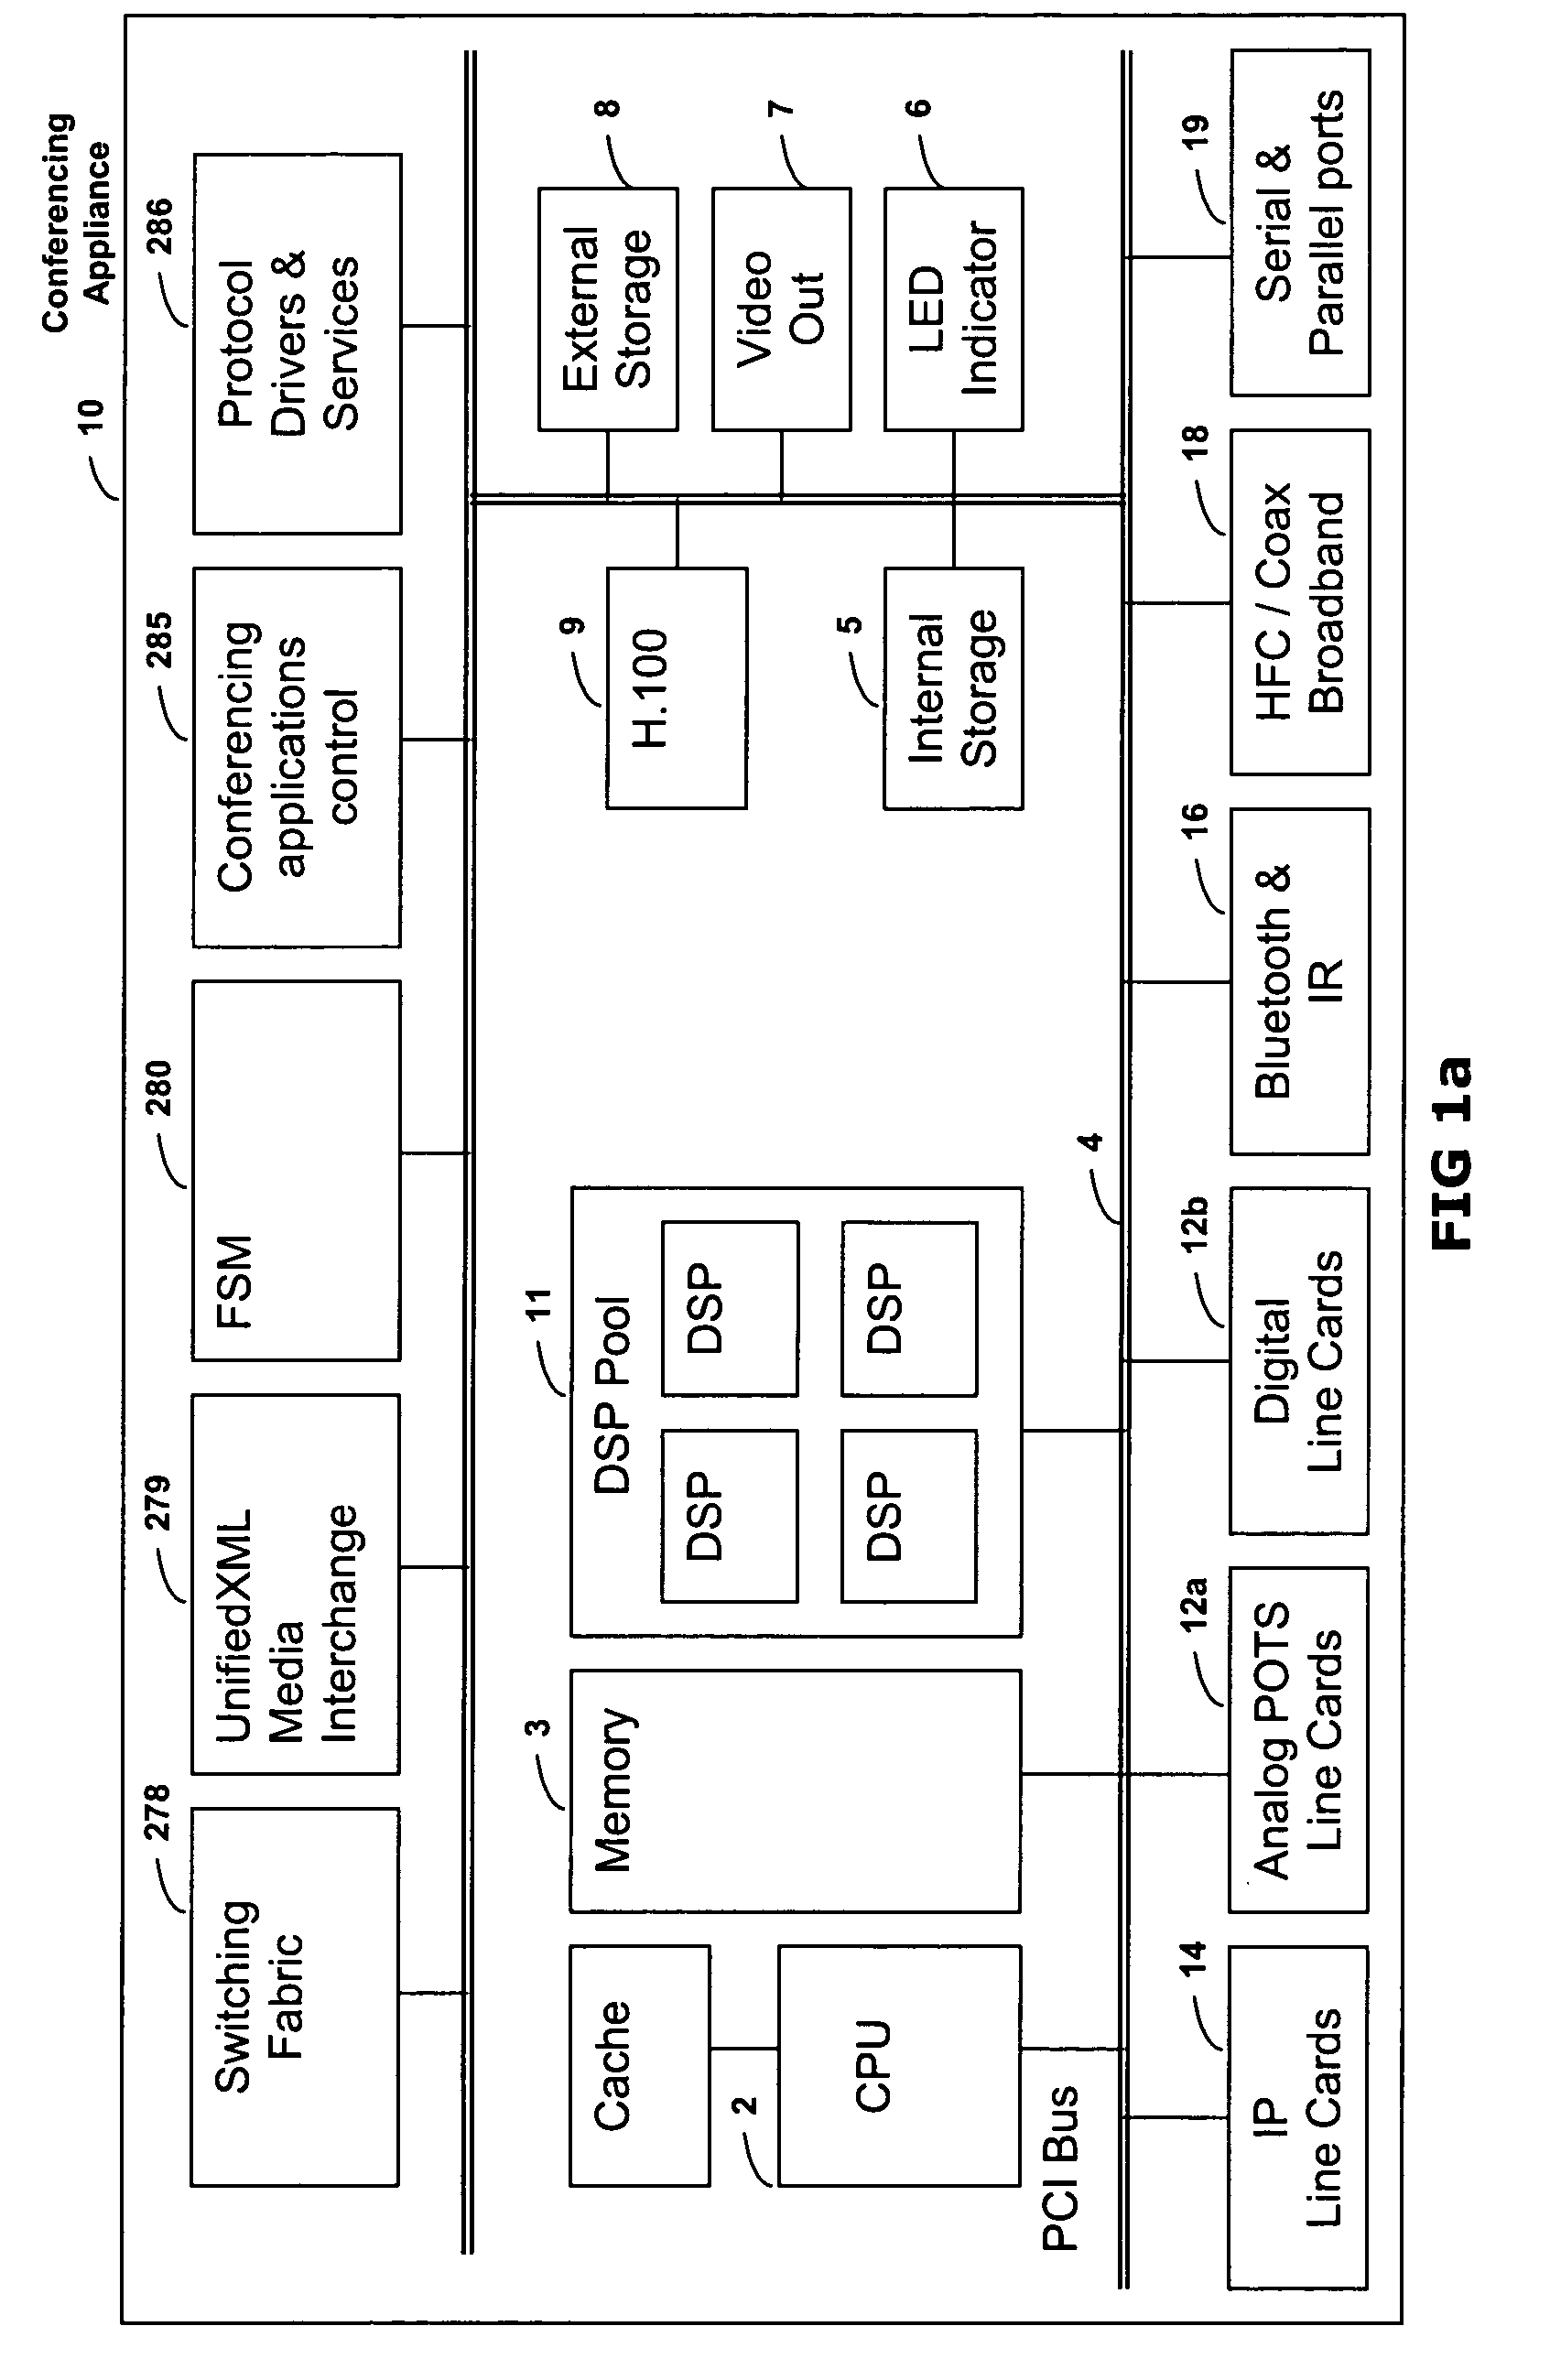 Converged conferencing appliance methods for concurrent voice and data conferencing sessions over networks